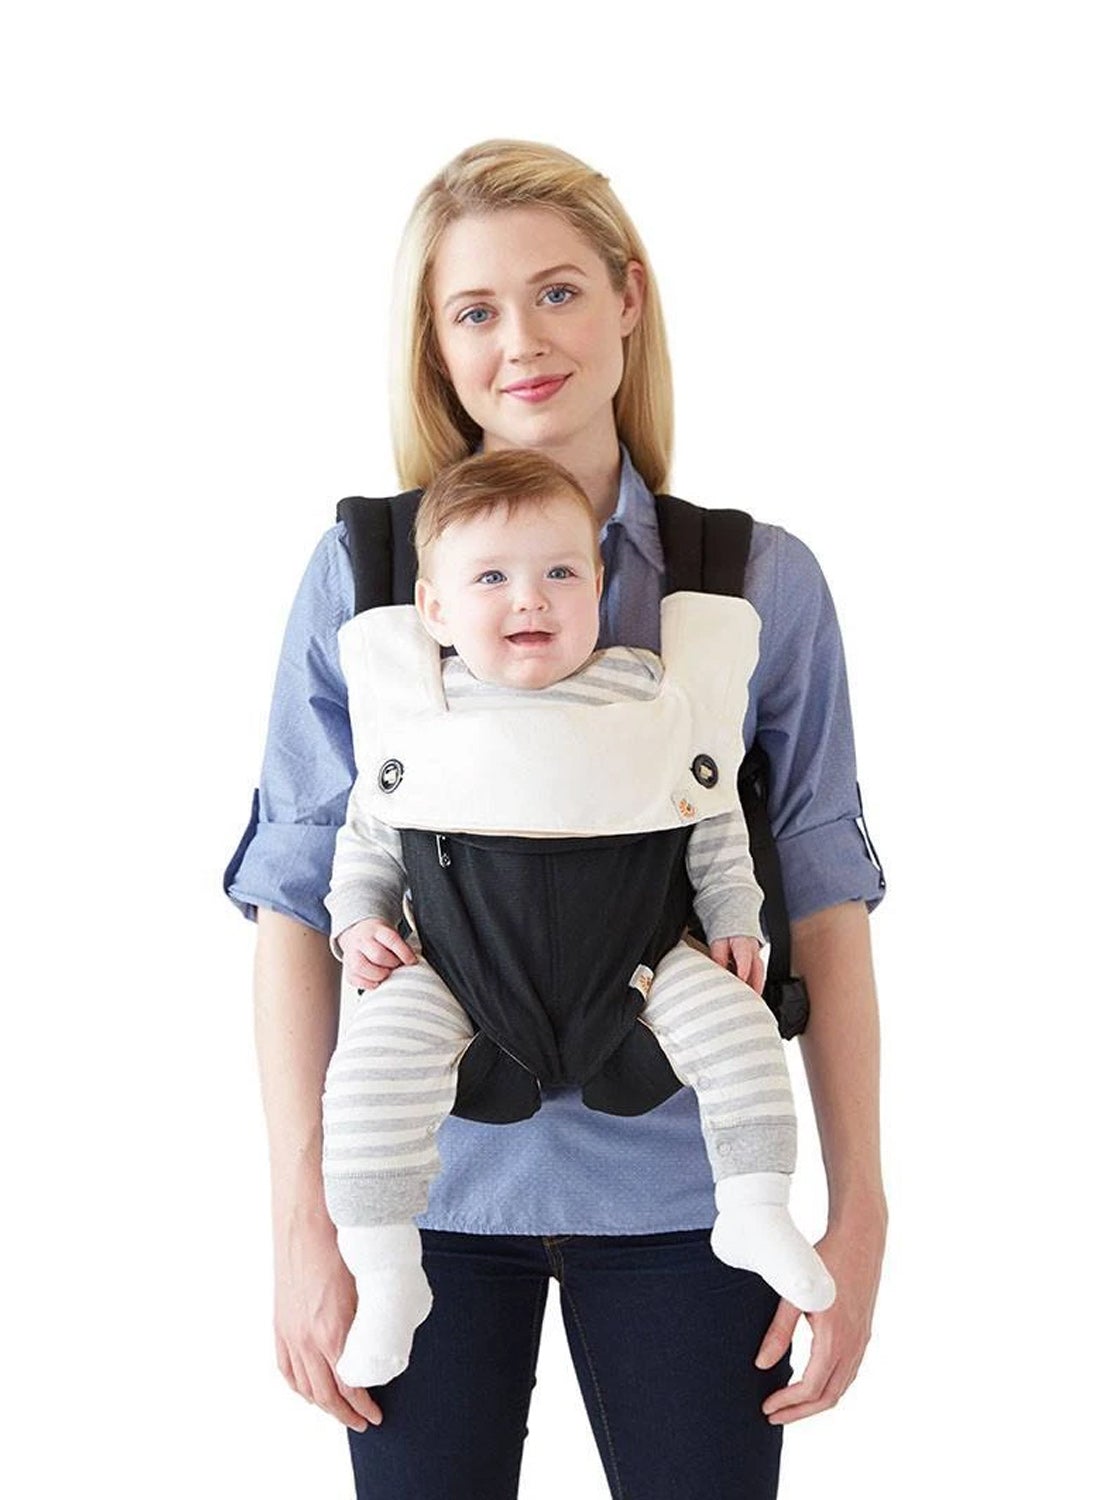 ERGOBABY Four Position Omni 360 Carrier Teething Pad and Bib.